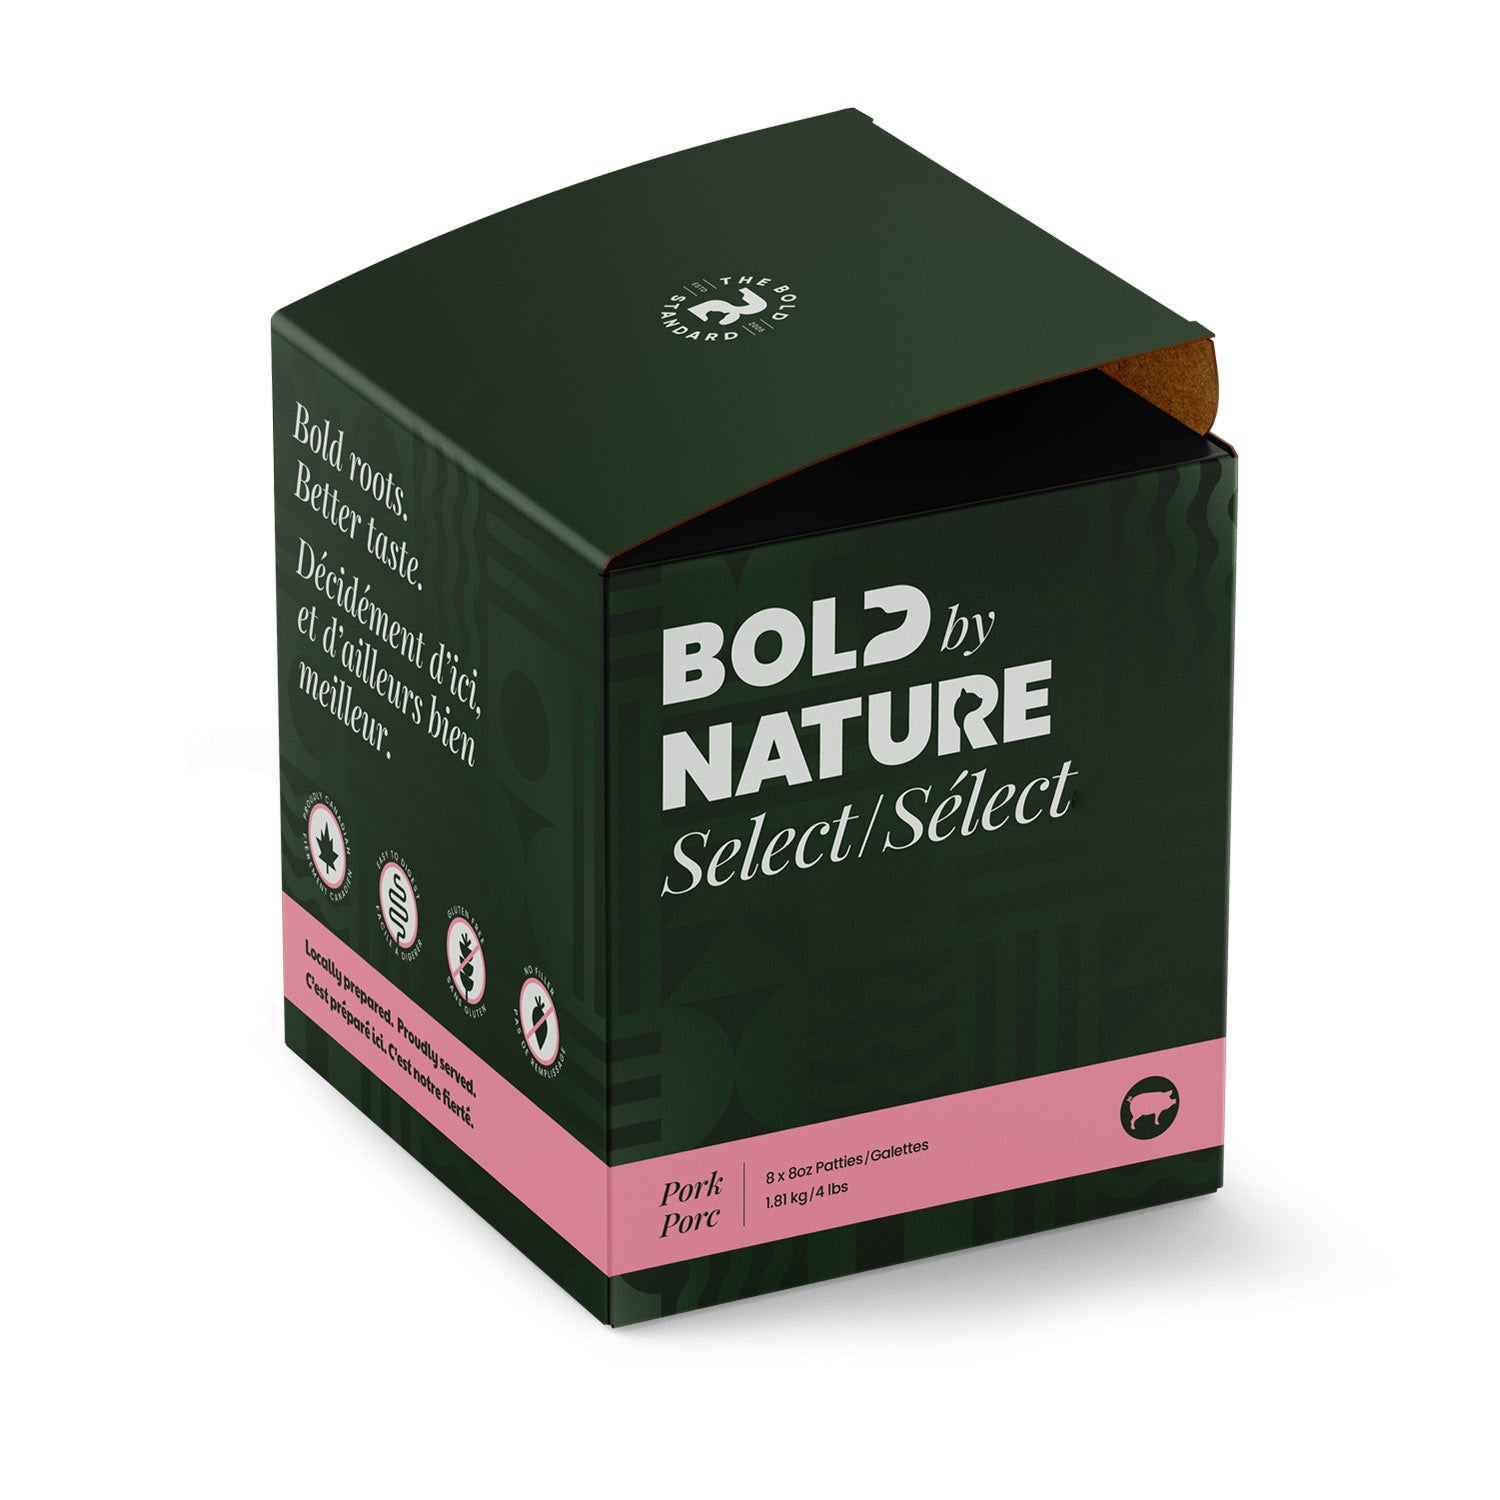 Bold by Nature (Bold Raw) - Select Pork - Frozen Product